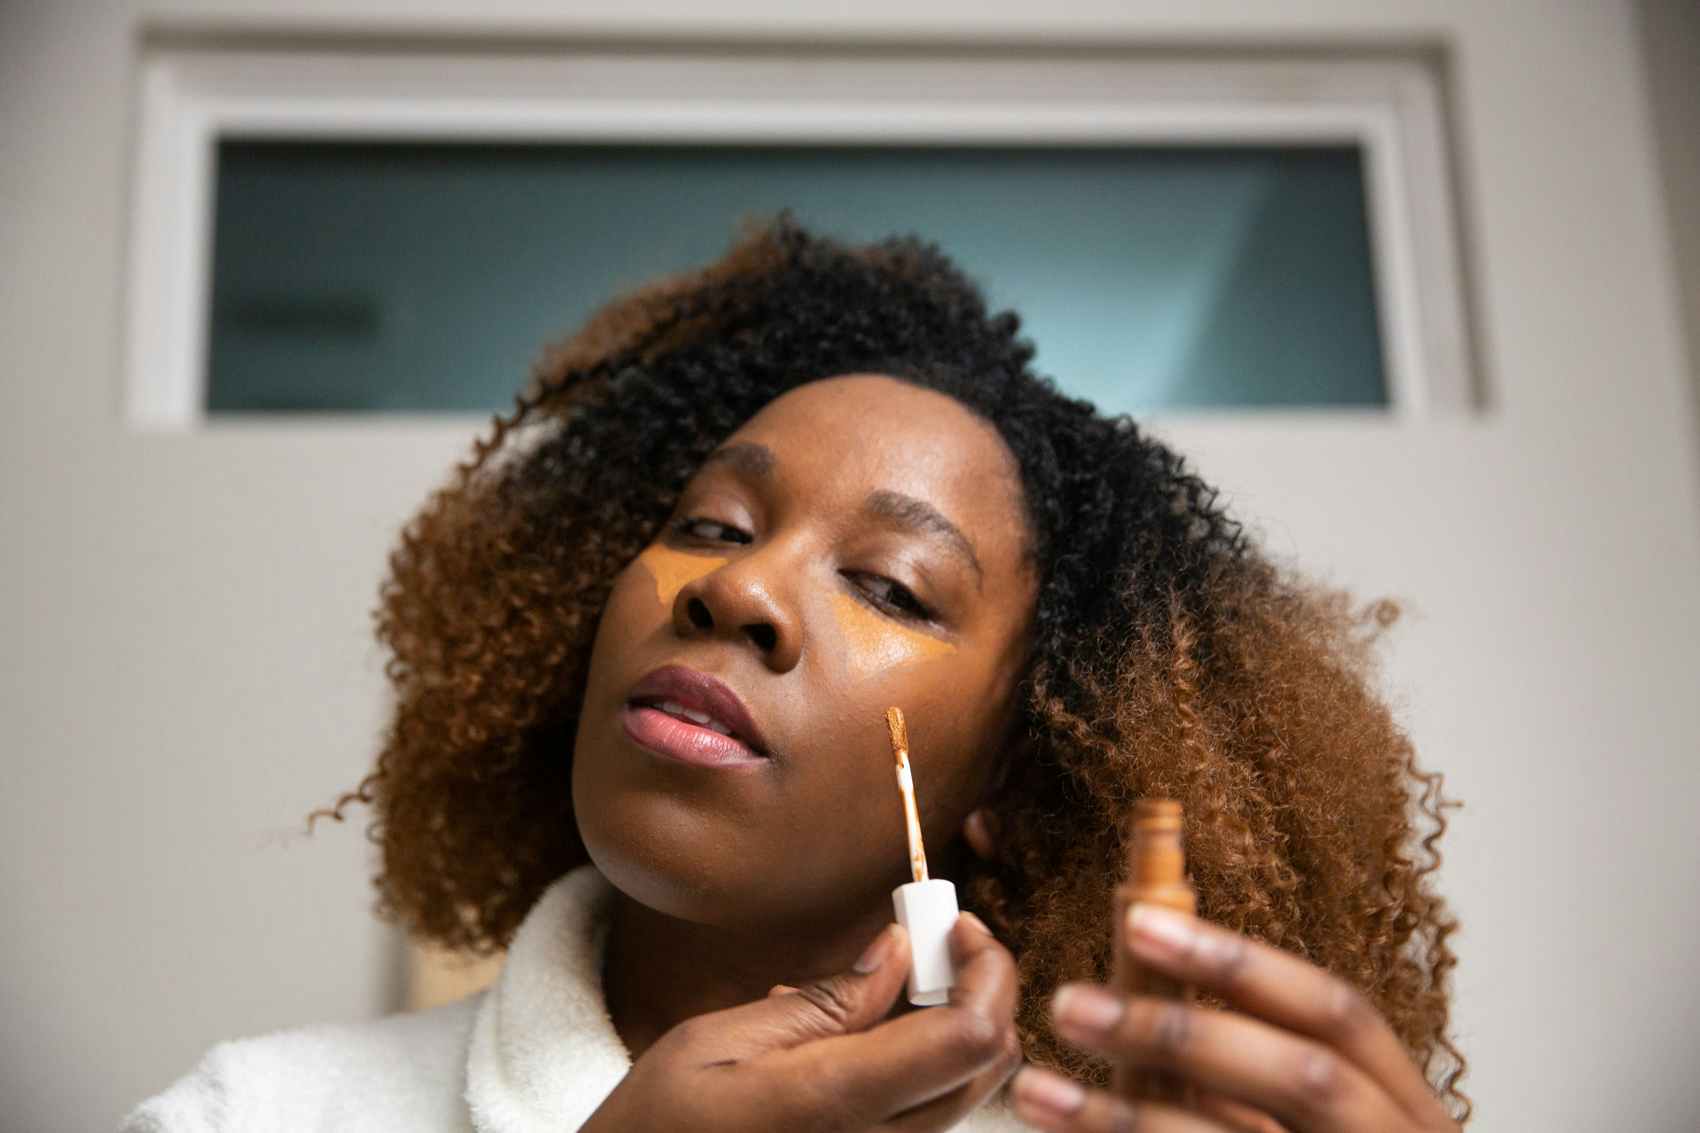 Woman applying concealer to their face